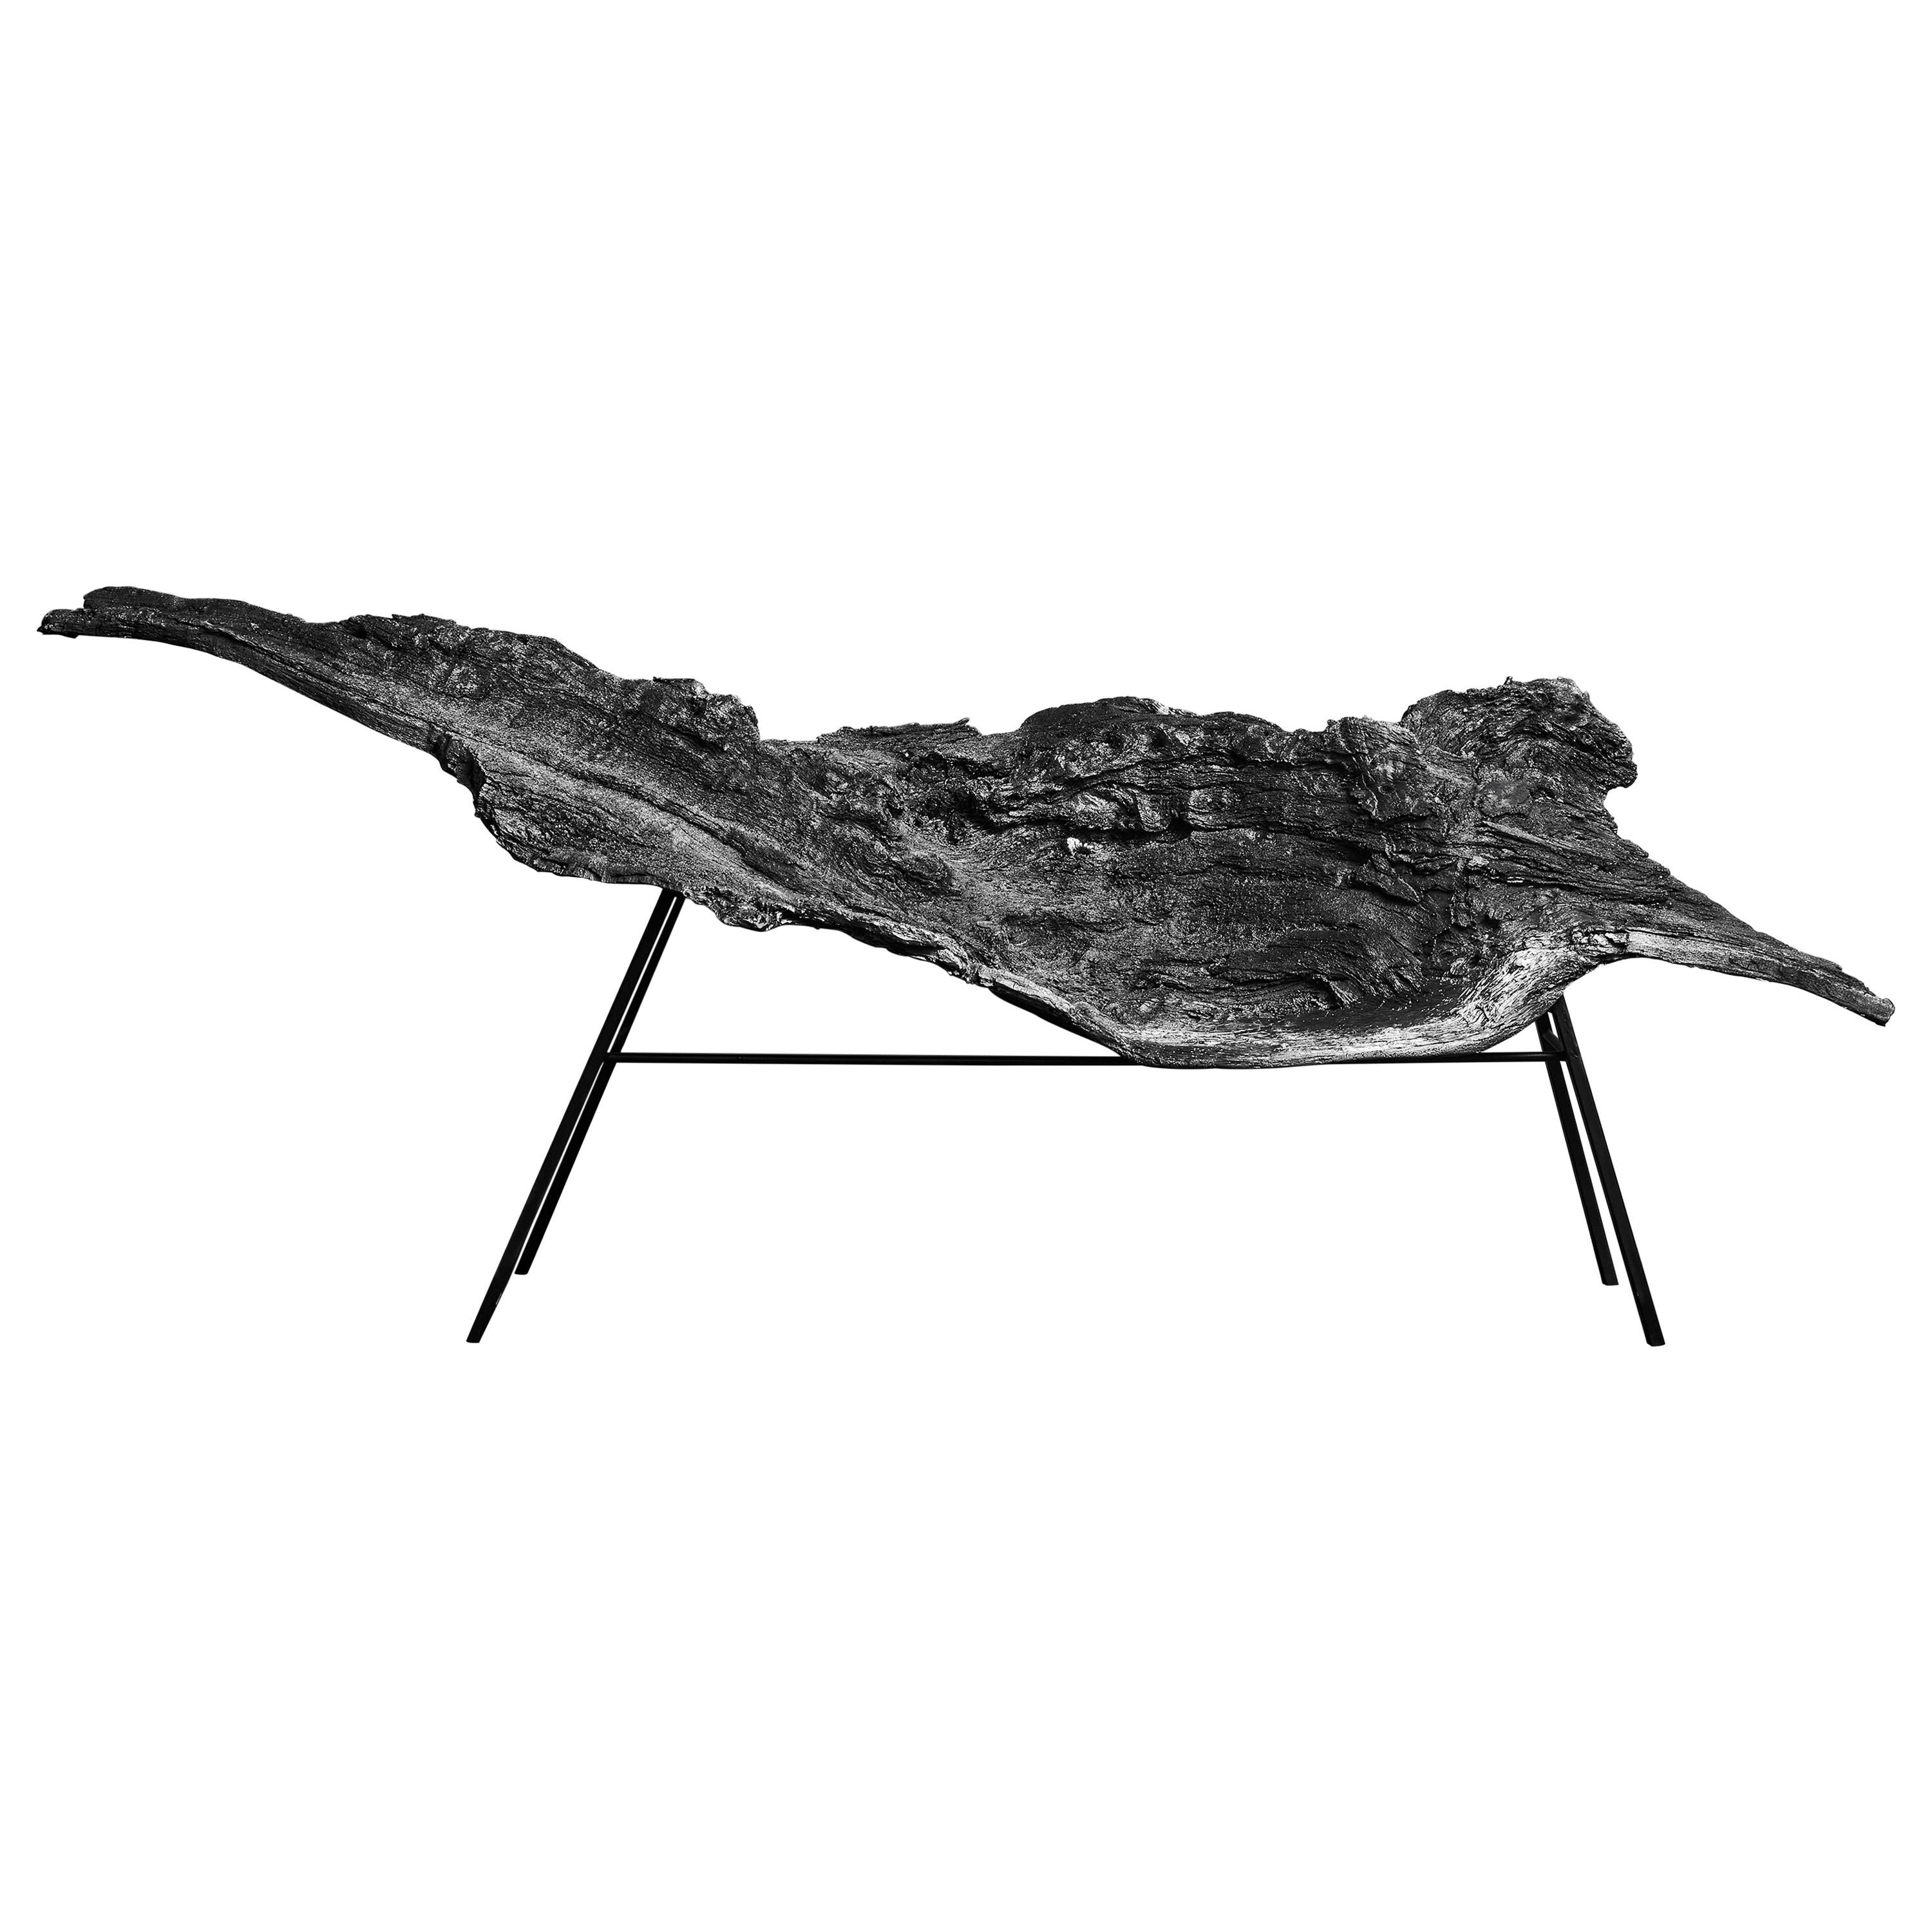 Sculptural "Trunk" Bench at Cost Price